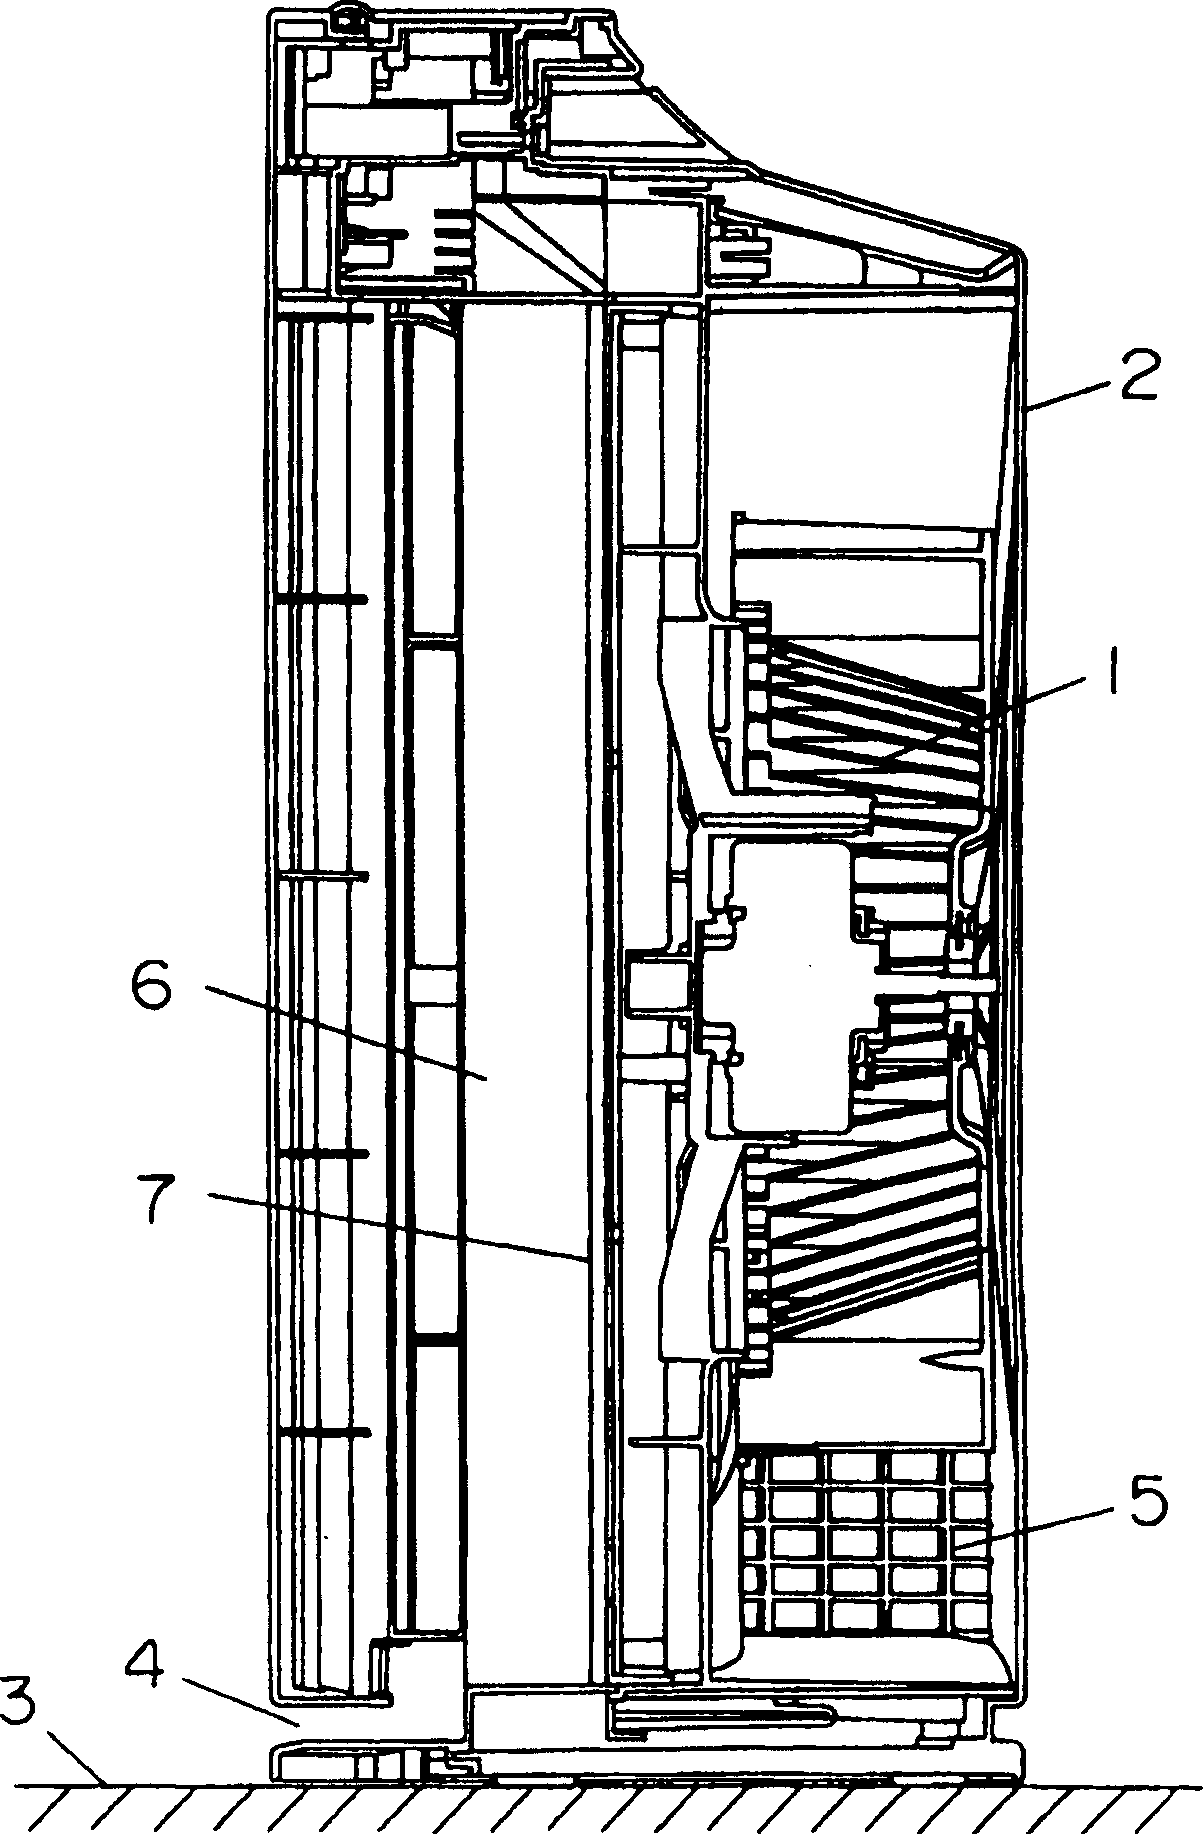 Air cleaner, functional filter and method of manufacturing the filter, air cleaning filter, and air cleaner device